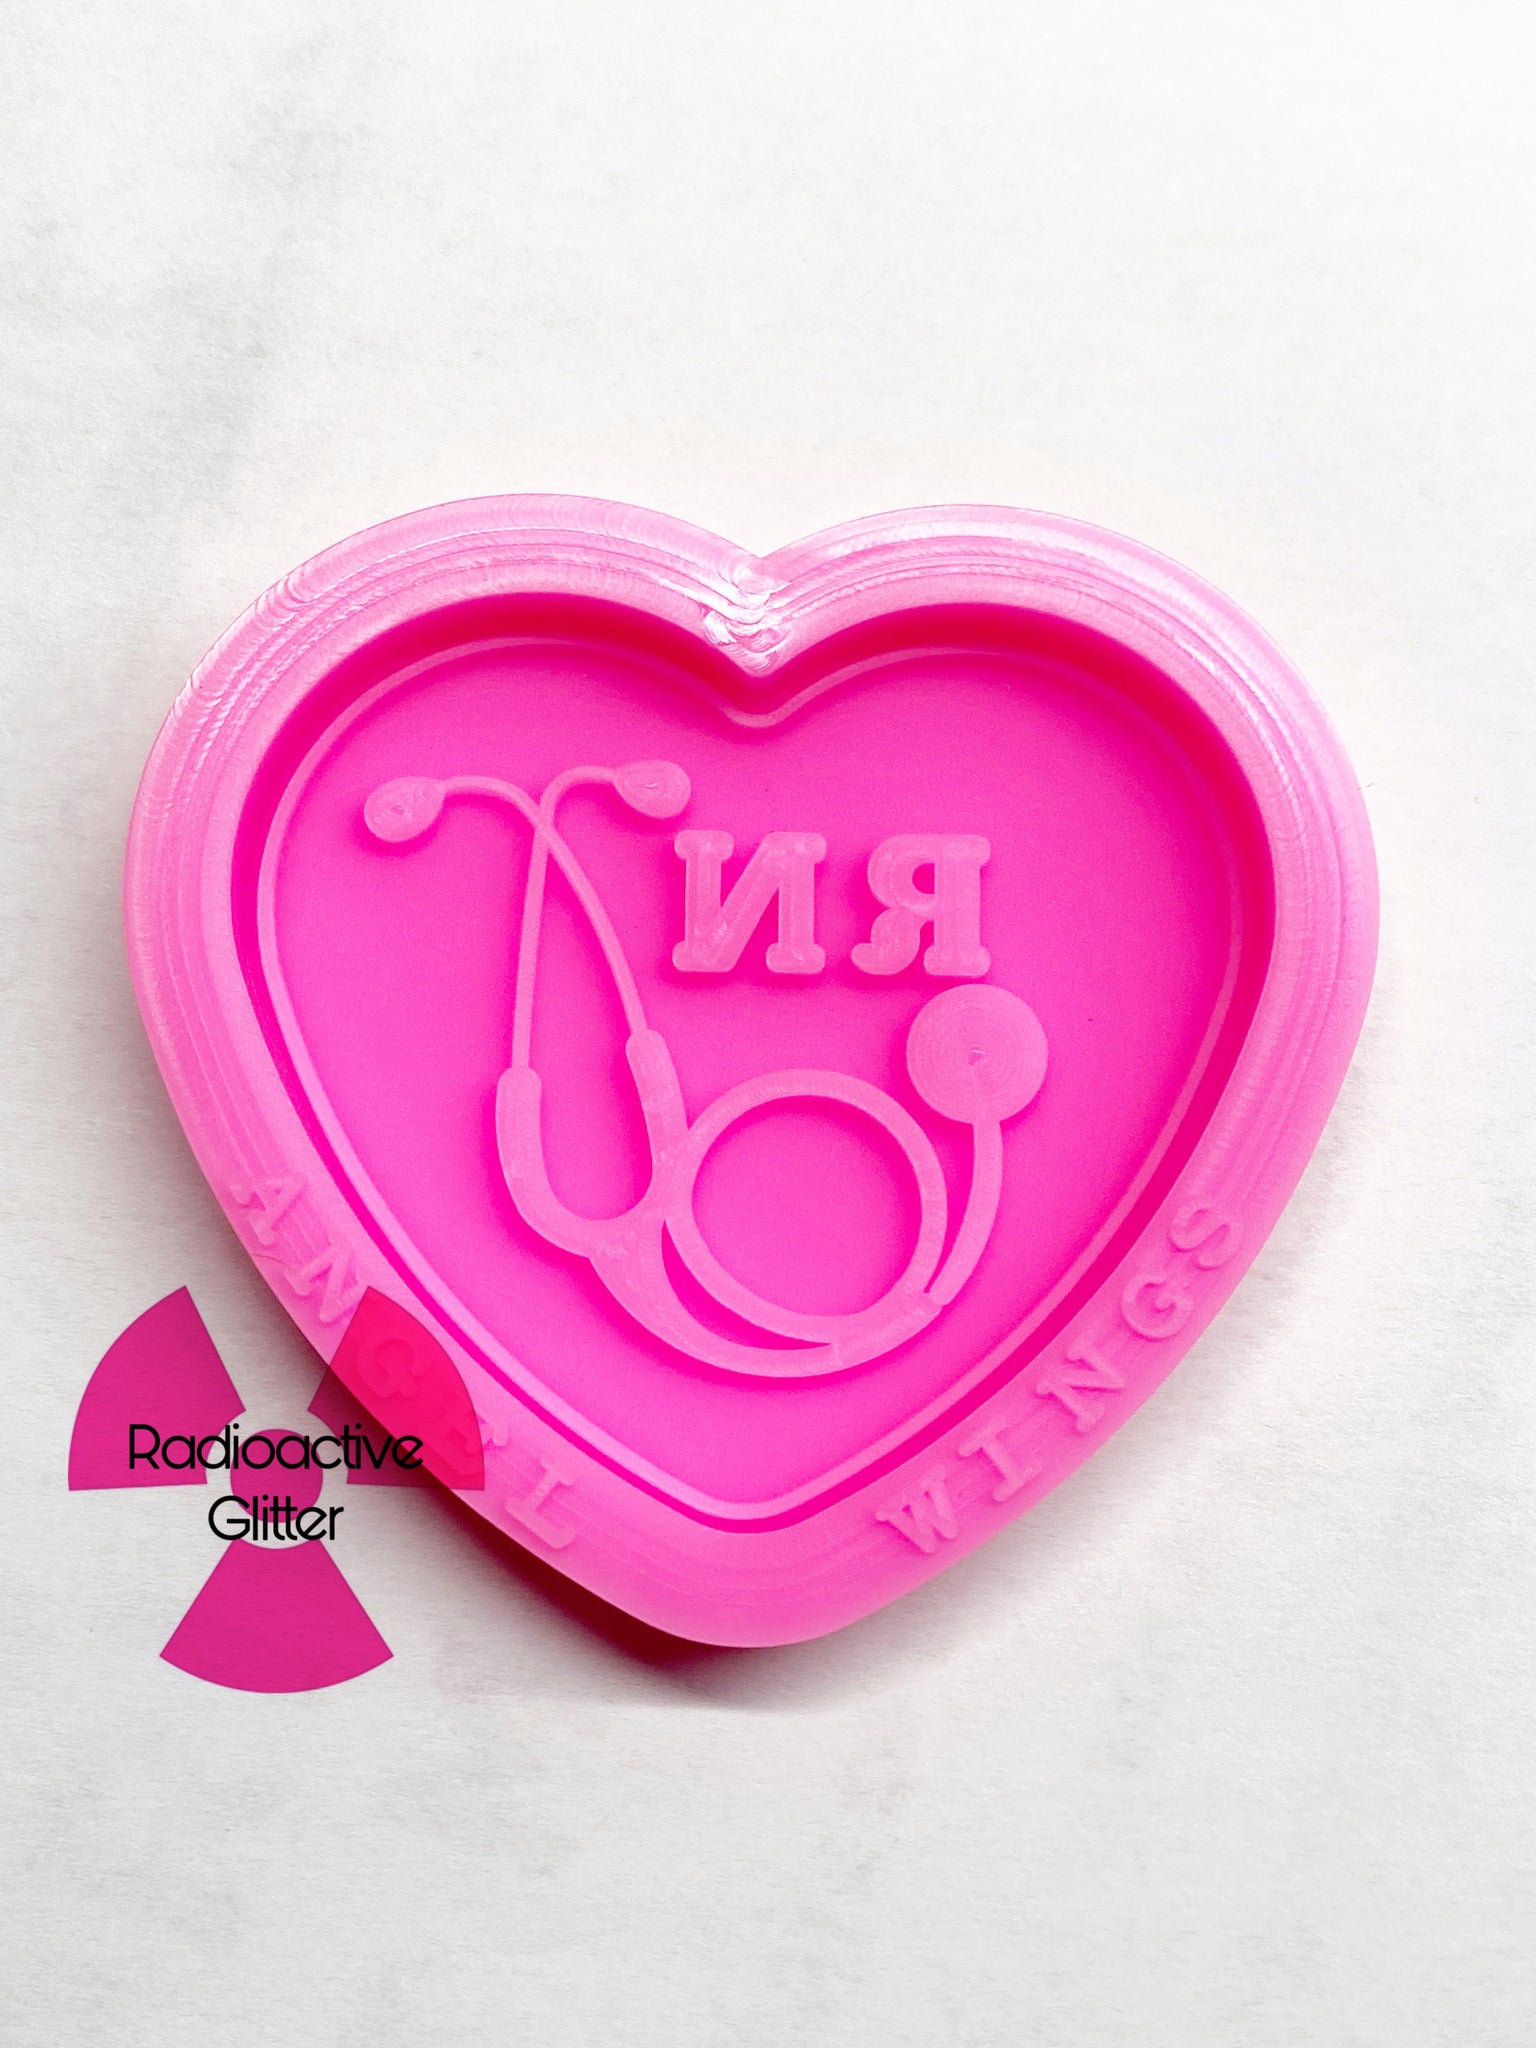 364 RN Heart Silicone Mold